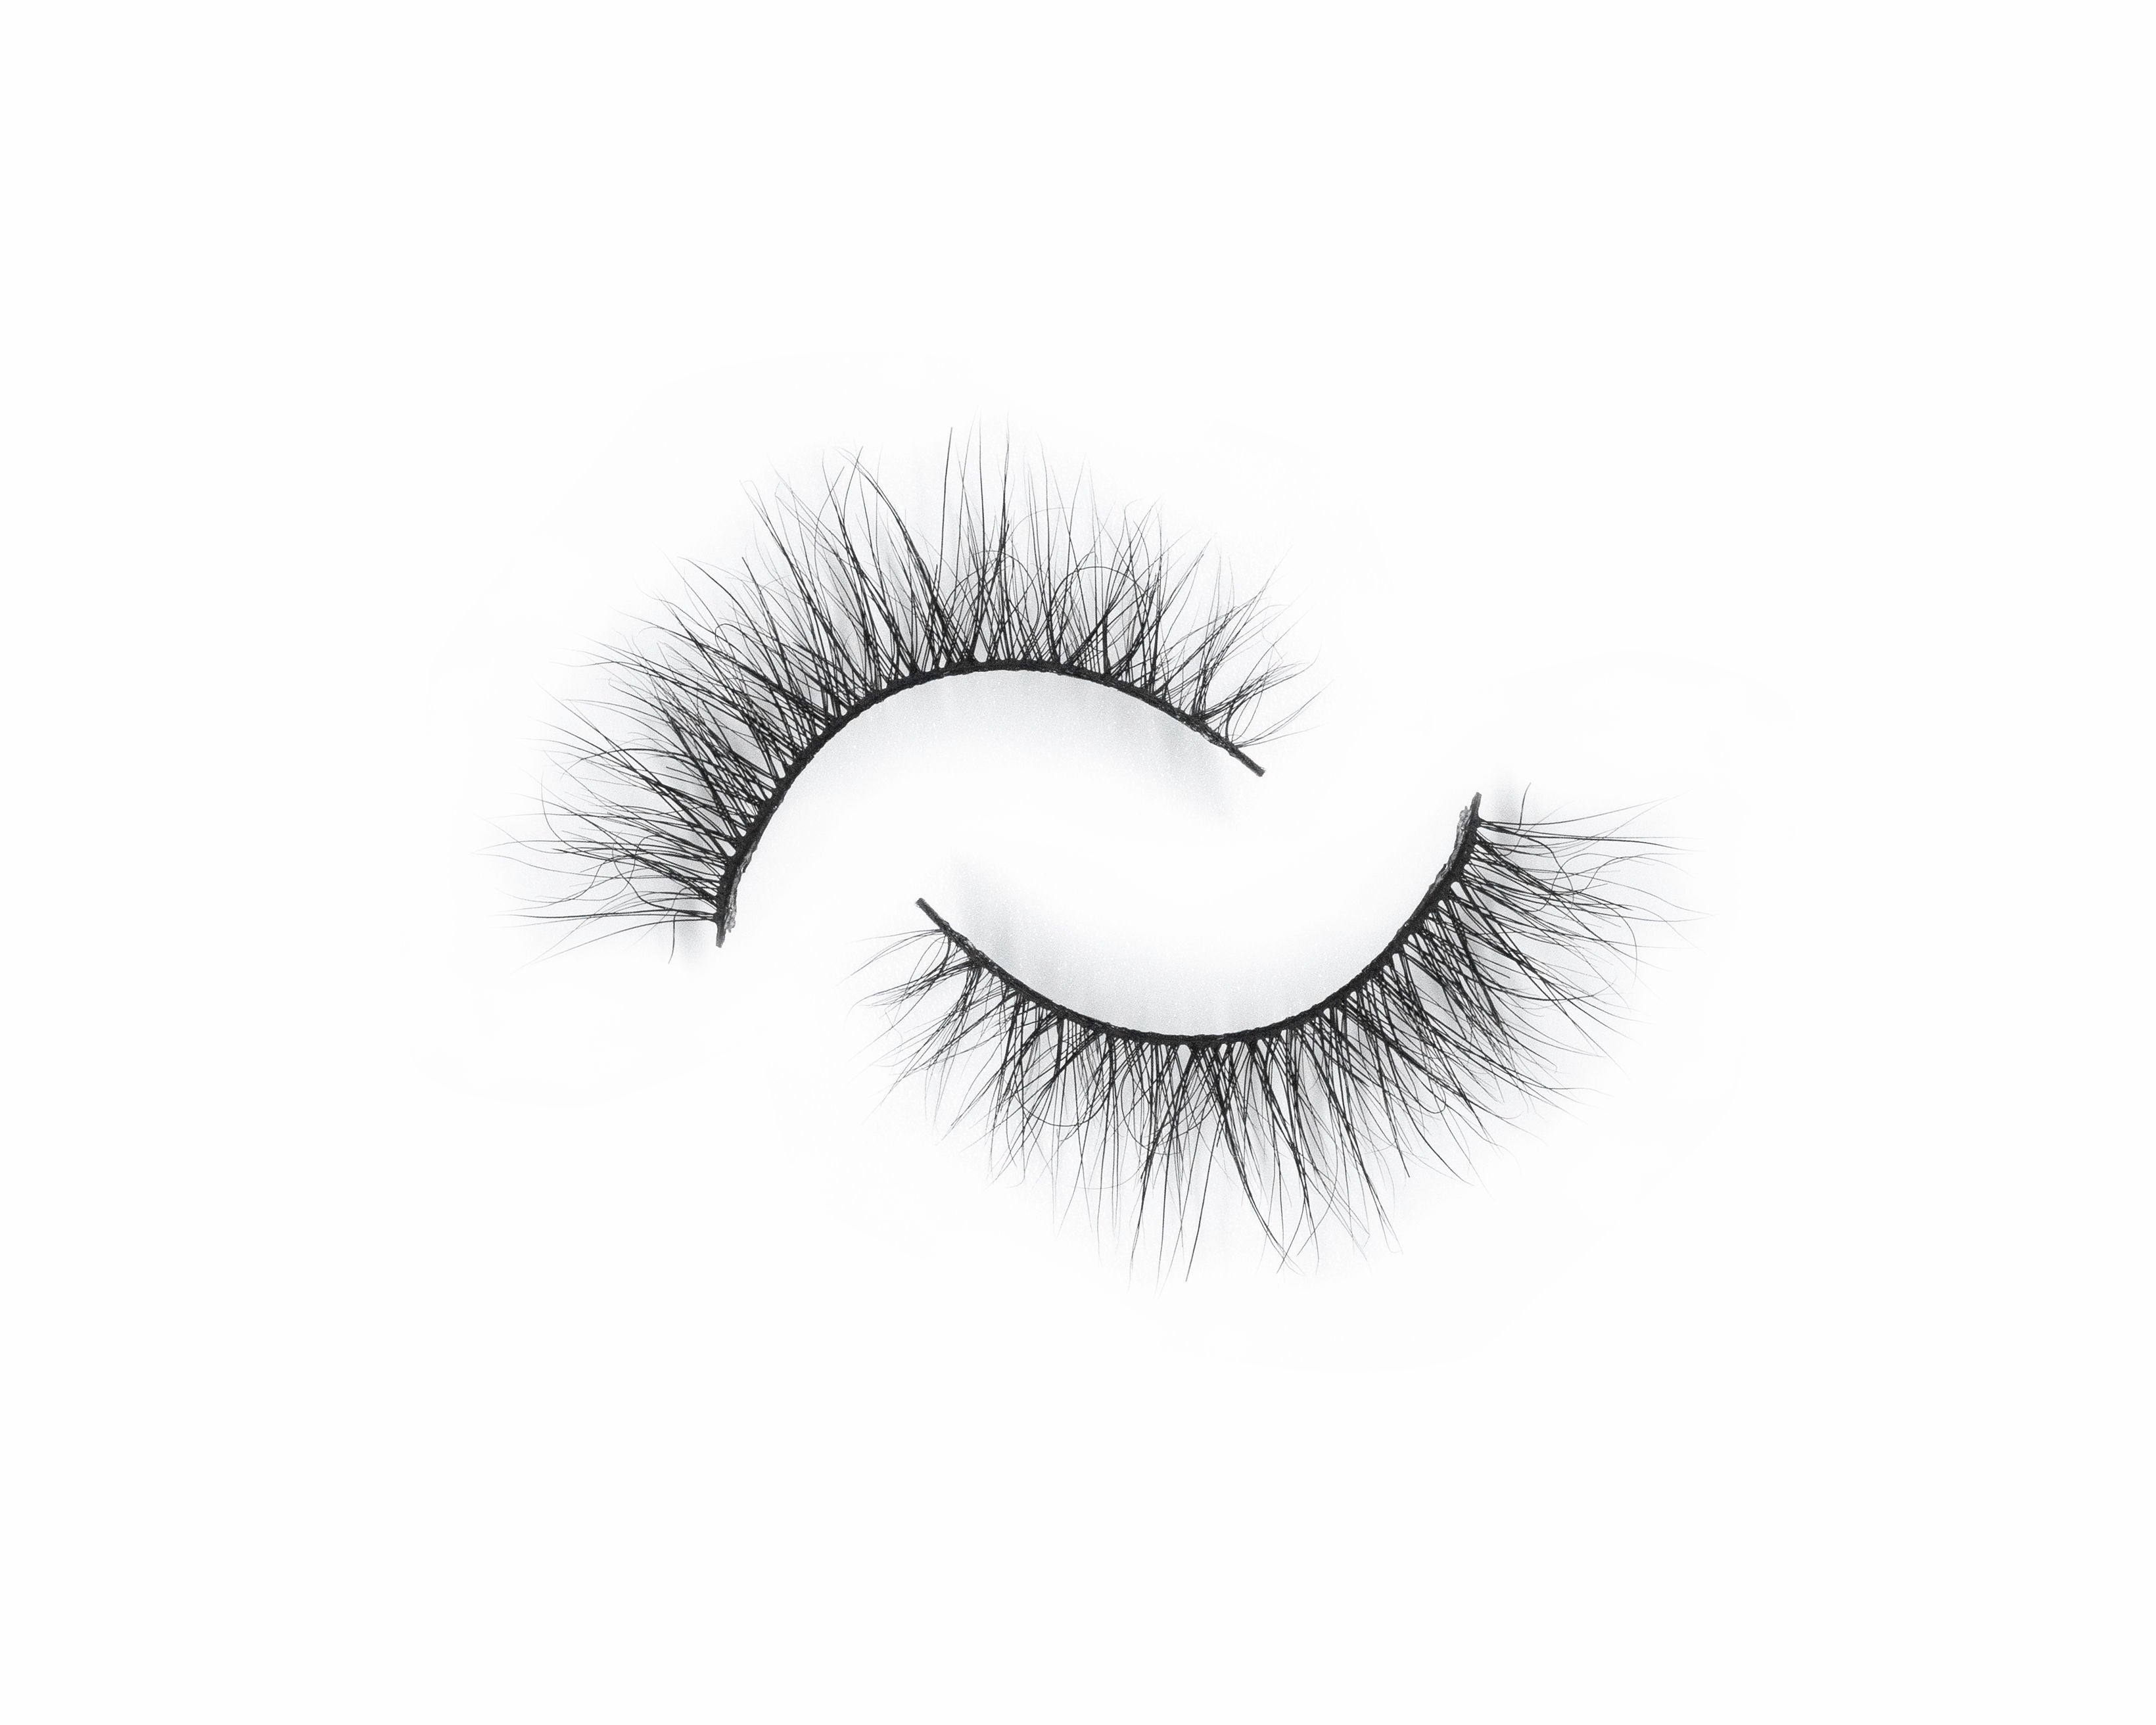 3D MINK LASHES 3D MINK EYELASHES 3D MINK HAIR LASHES 3D MINK EYELASH EXTENSIONS. 3D MINK STRIP EYELASHES. We are offering cheap 3d mink lashes and free delivery on all orders 40$ up domestically and 60$ internationally.